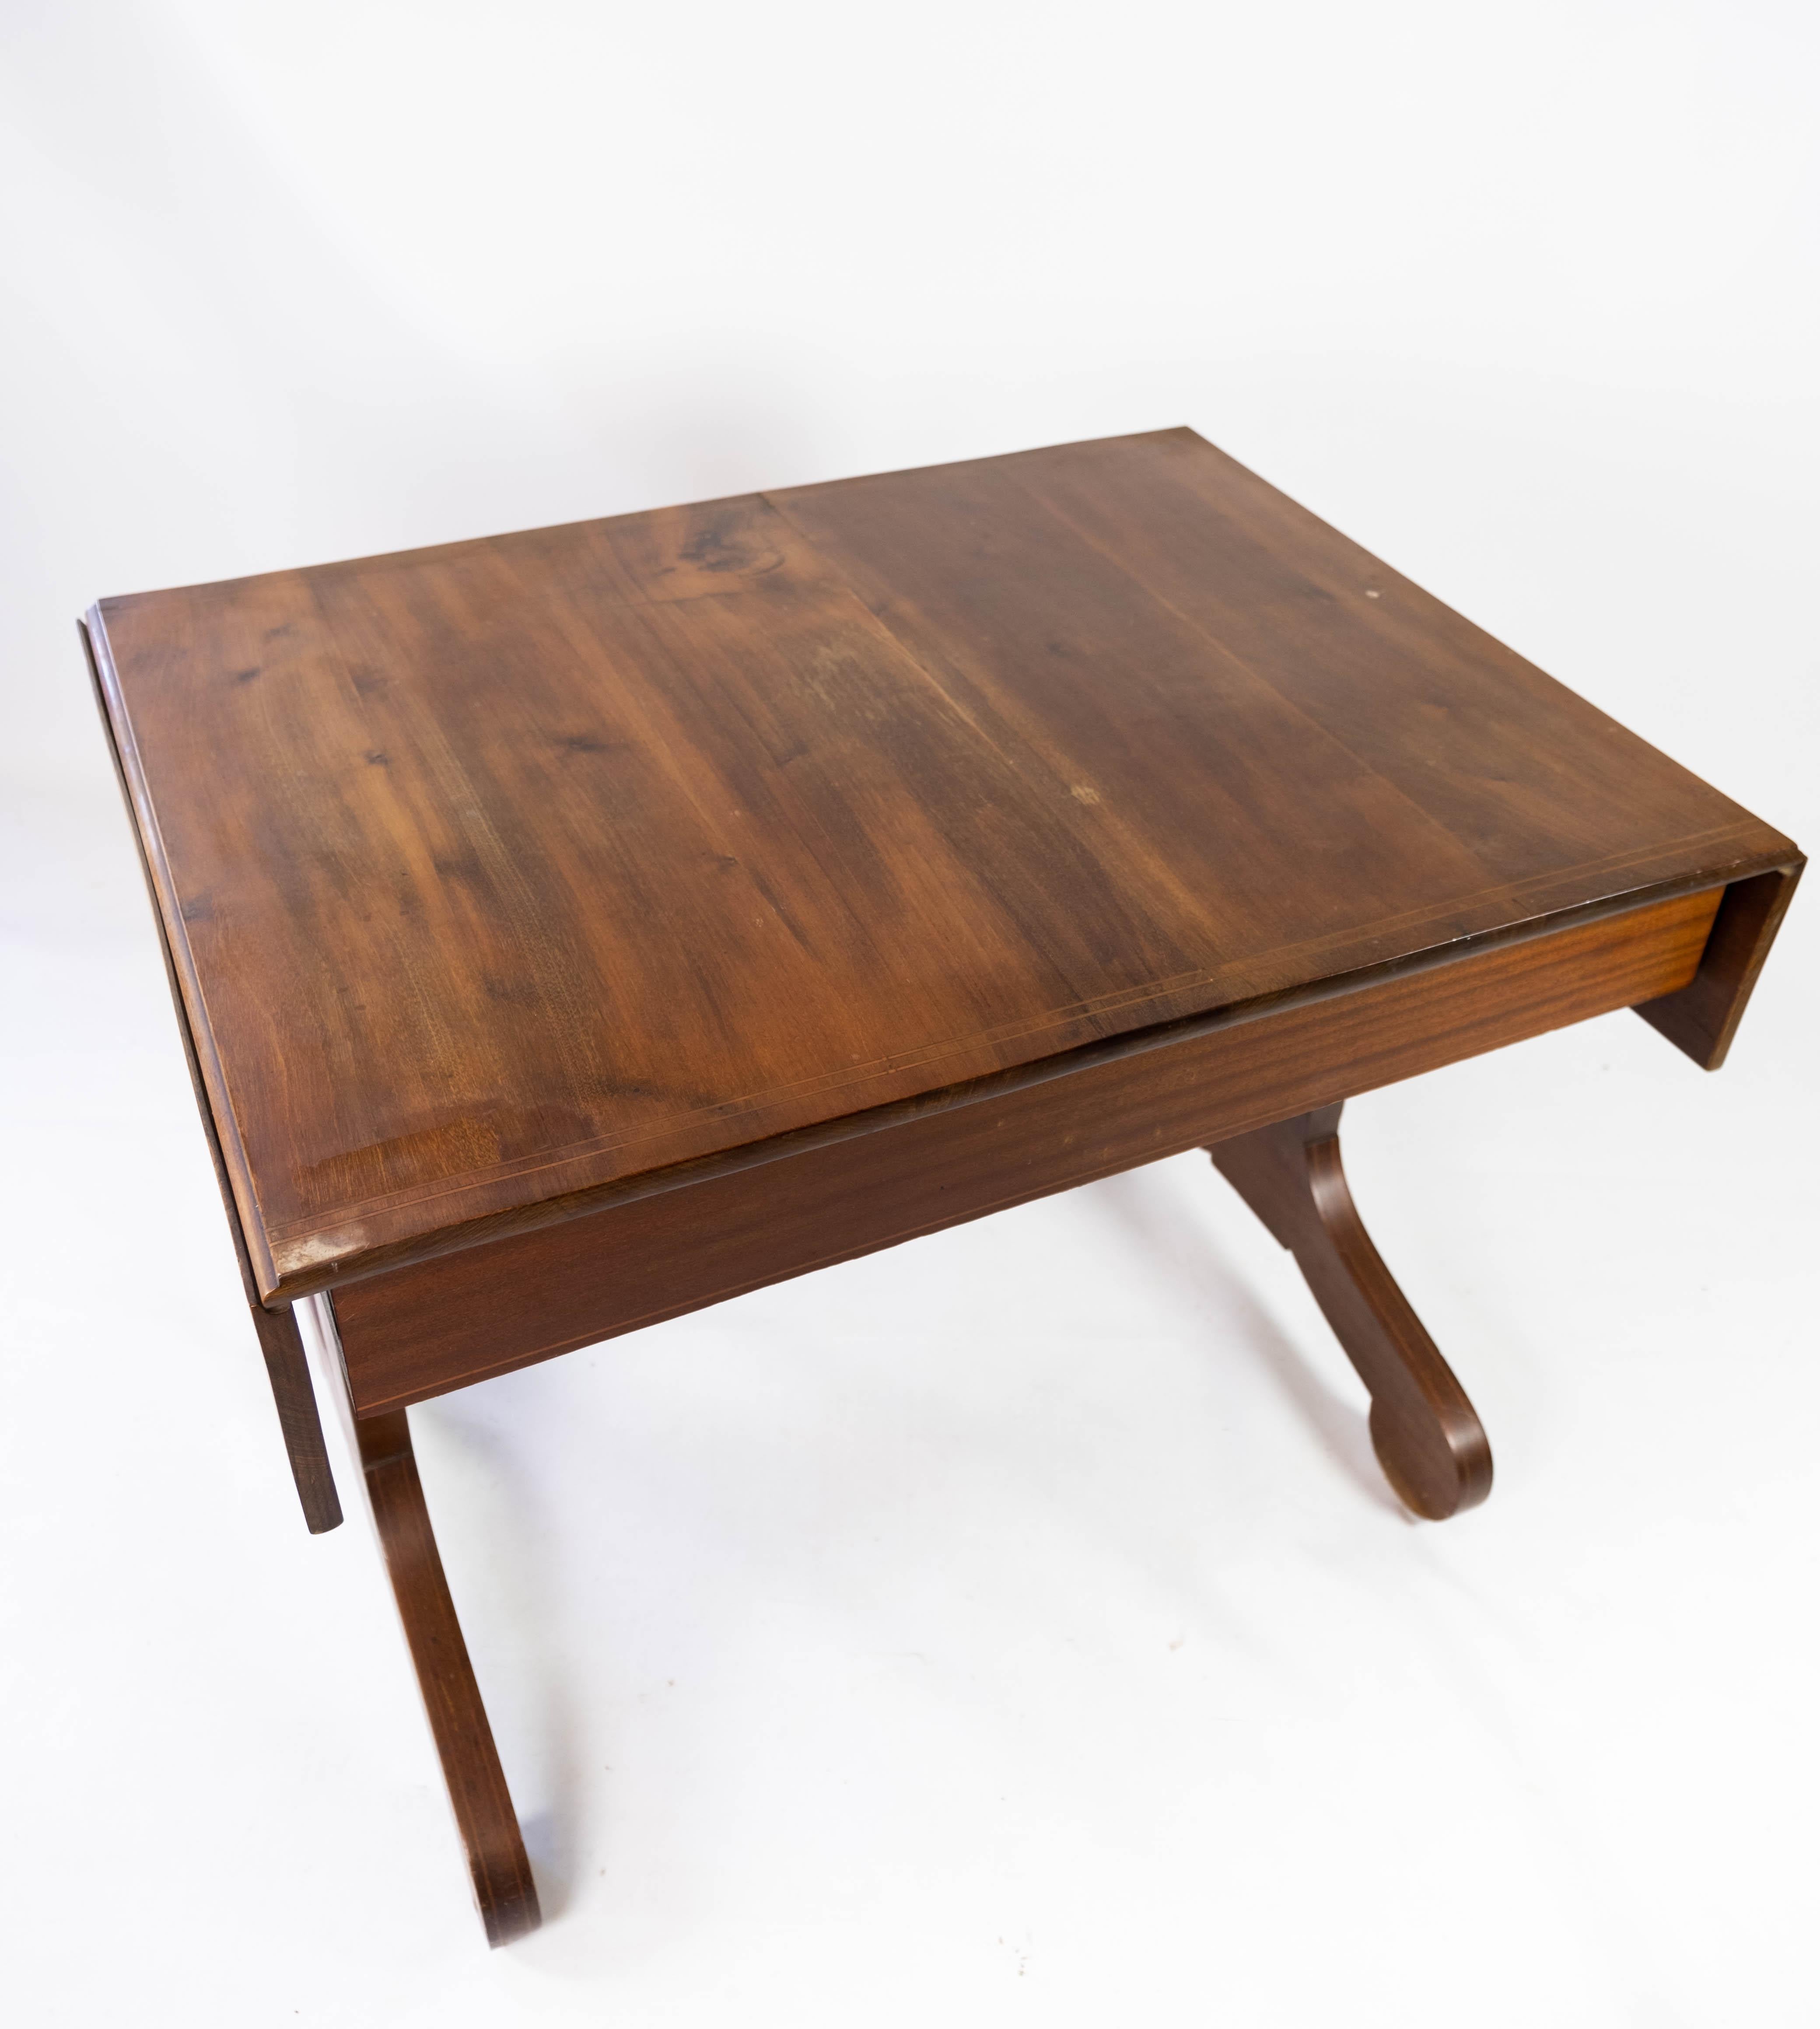 Dining table with extensions of mahogany and in great antique condition from 1860. 
Measurements of extention are 132 cm.